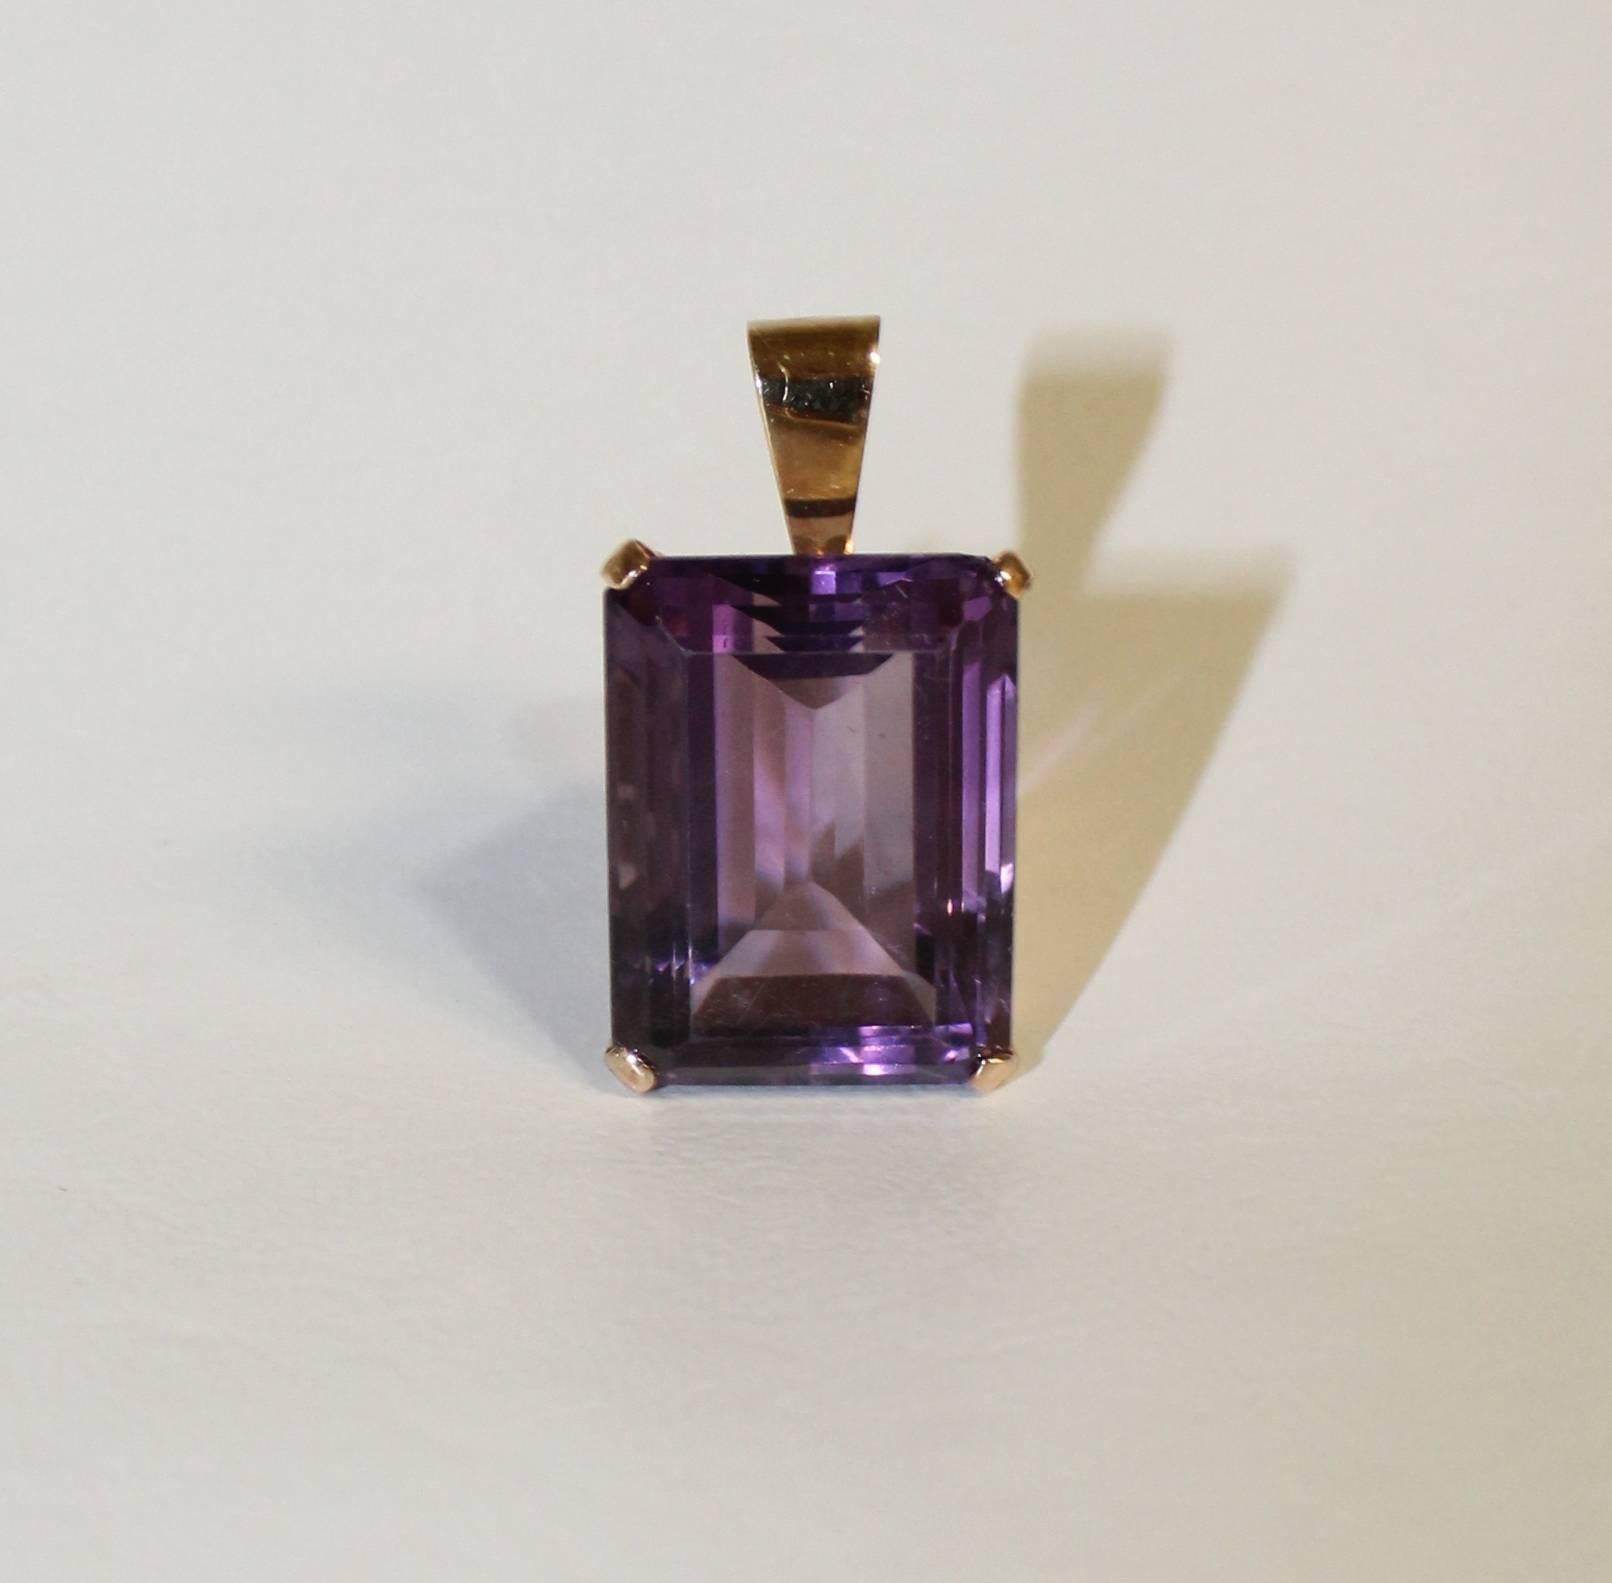 14-Karat Gold and Amethyst Ladies Necklace Pendant In Good Condition For Sale In Hamilton, Ontario